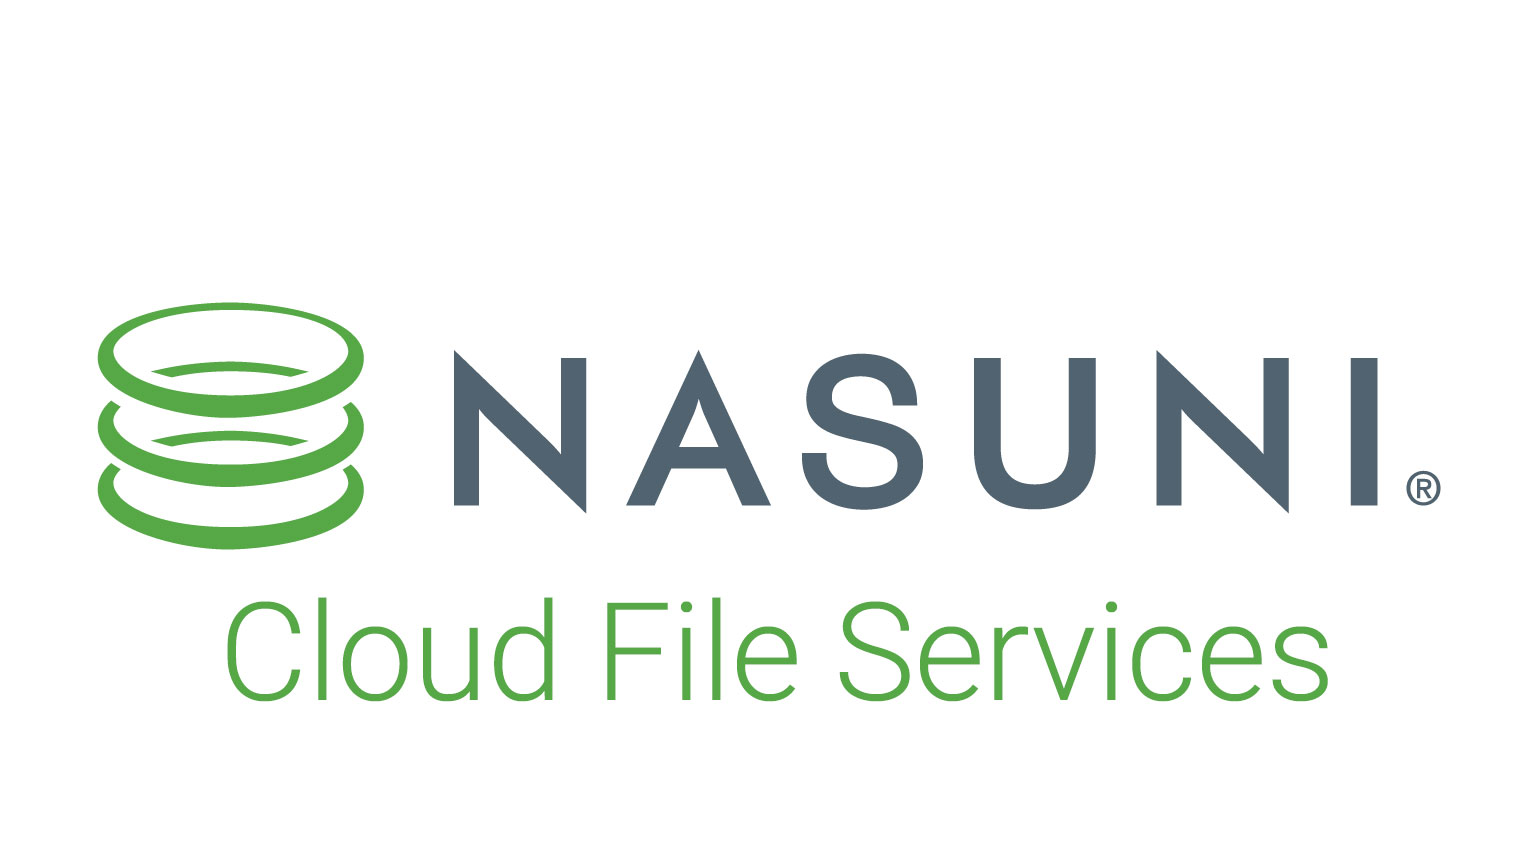 Nasuni Receives $25 Million Growth Equity Funding From Telstra Ventures; Experiences Record 2018 Revenue Results - Nasuni